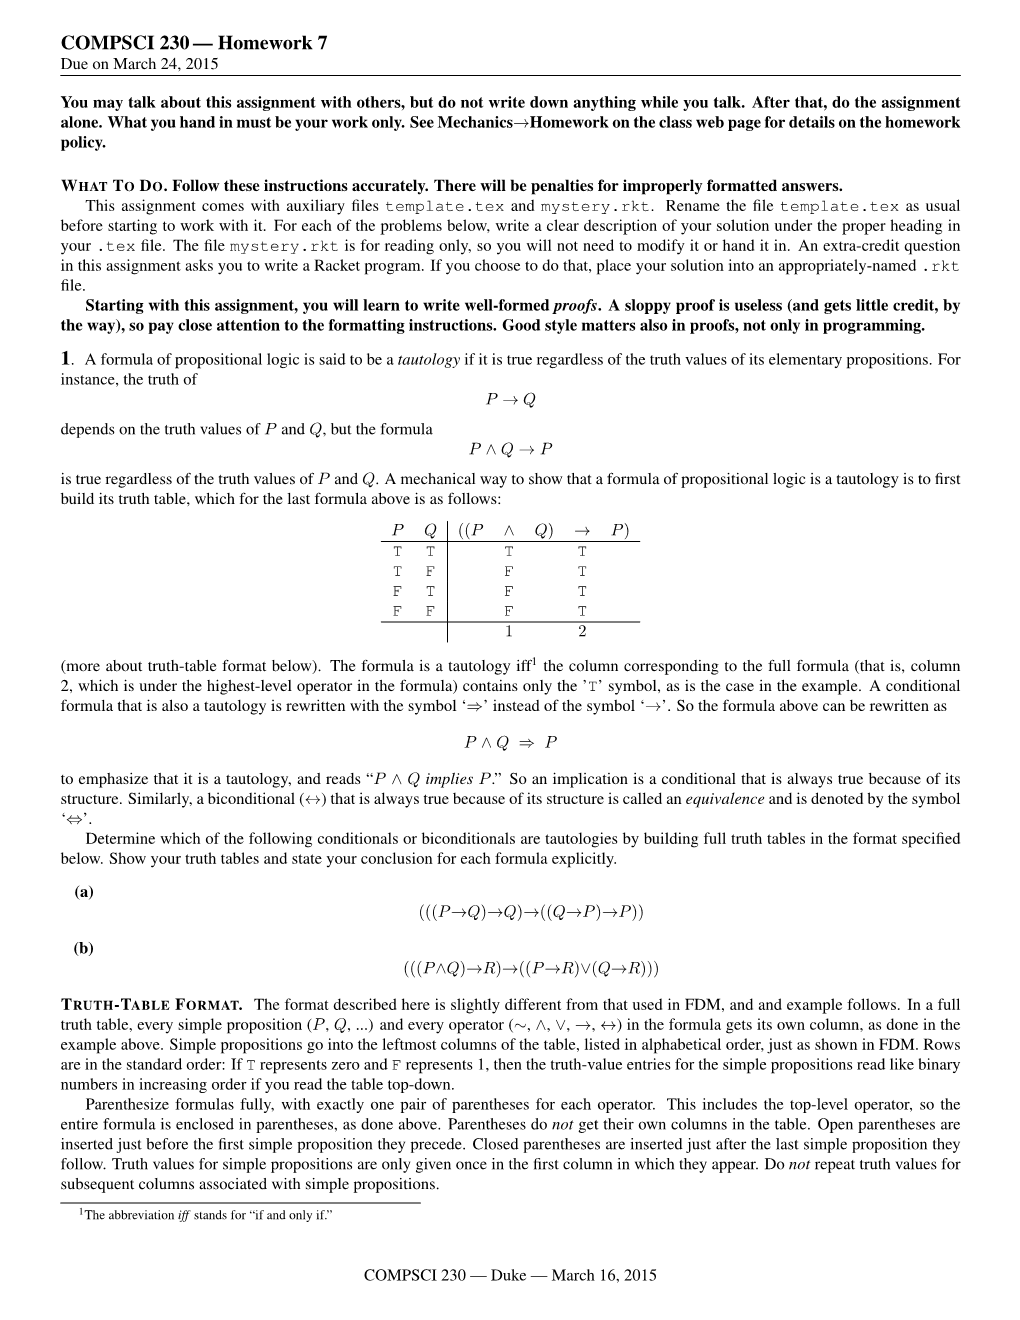 COMPSCI 230 — Homework 7 Due on March 24, 2015